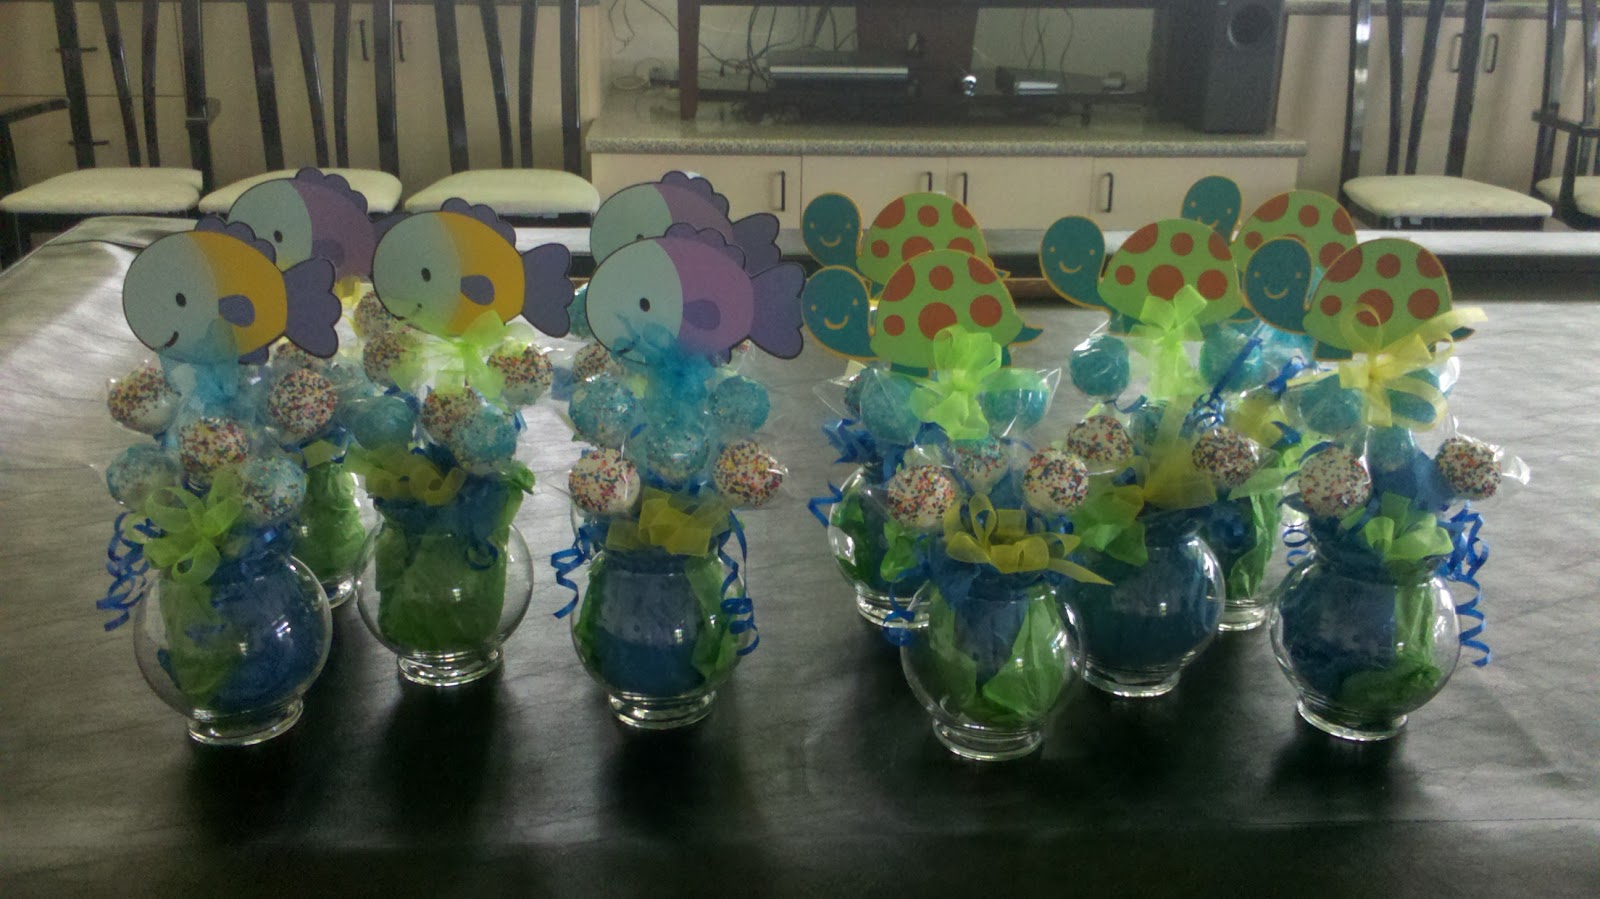 Completed centerpieces.